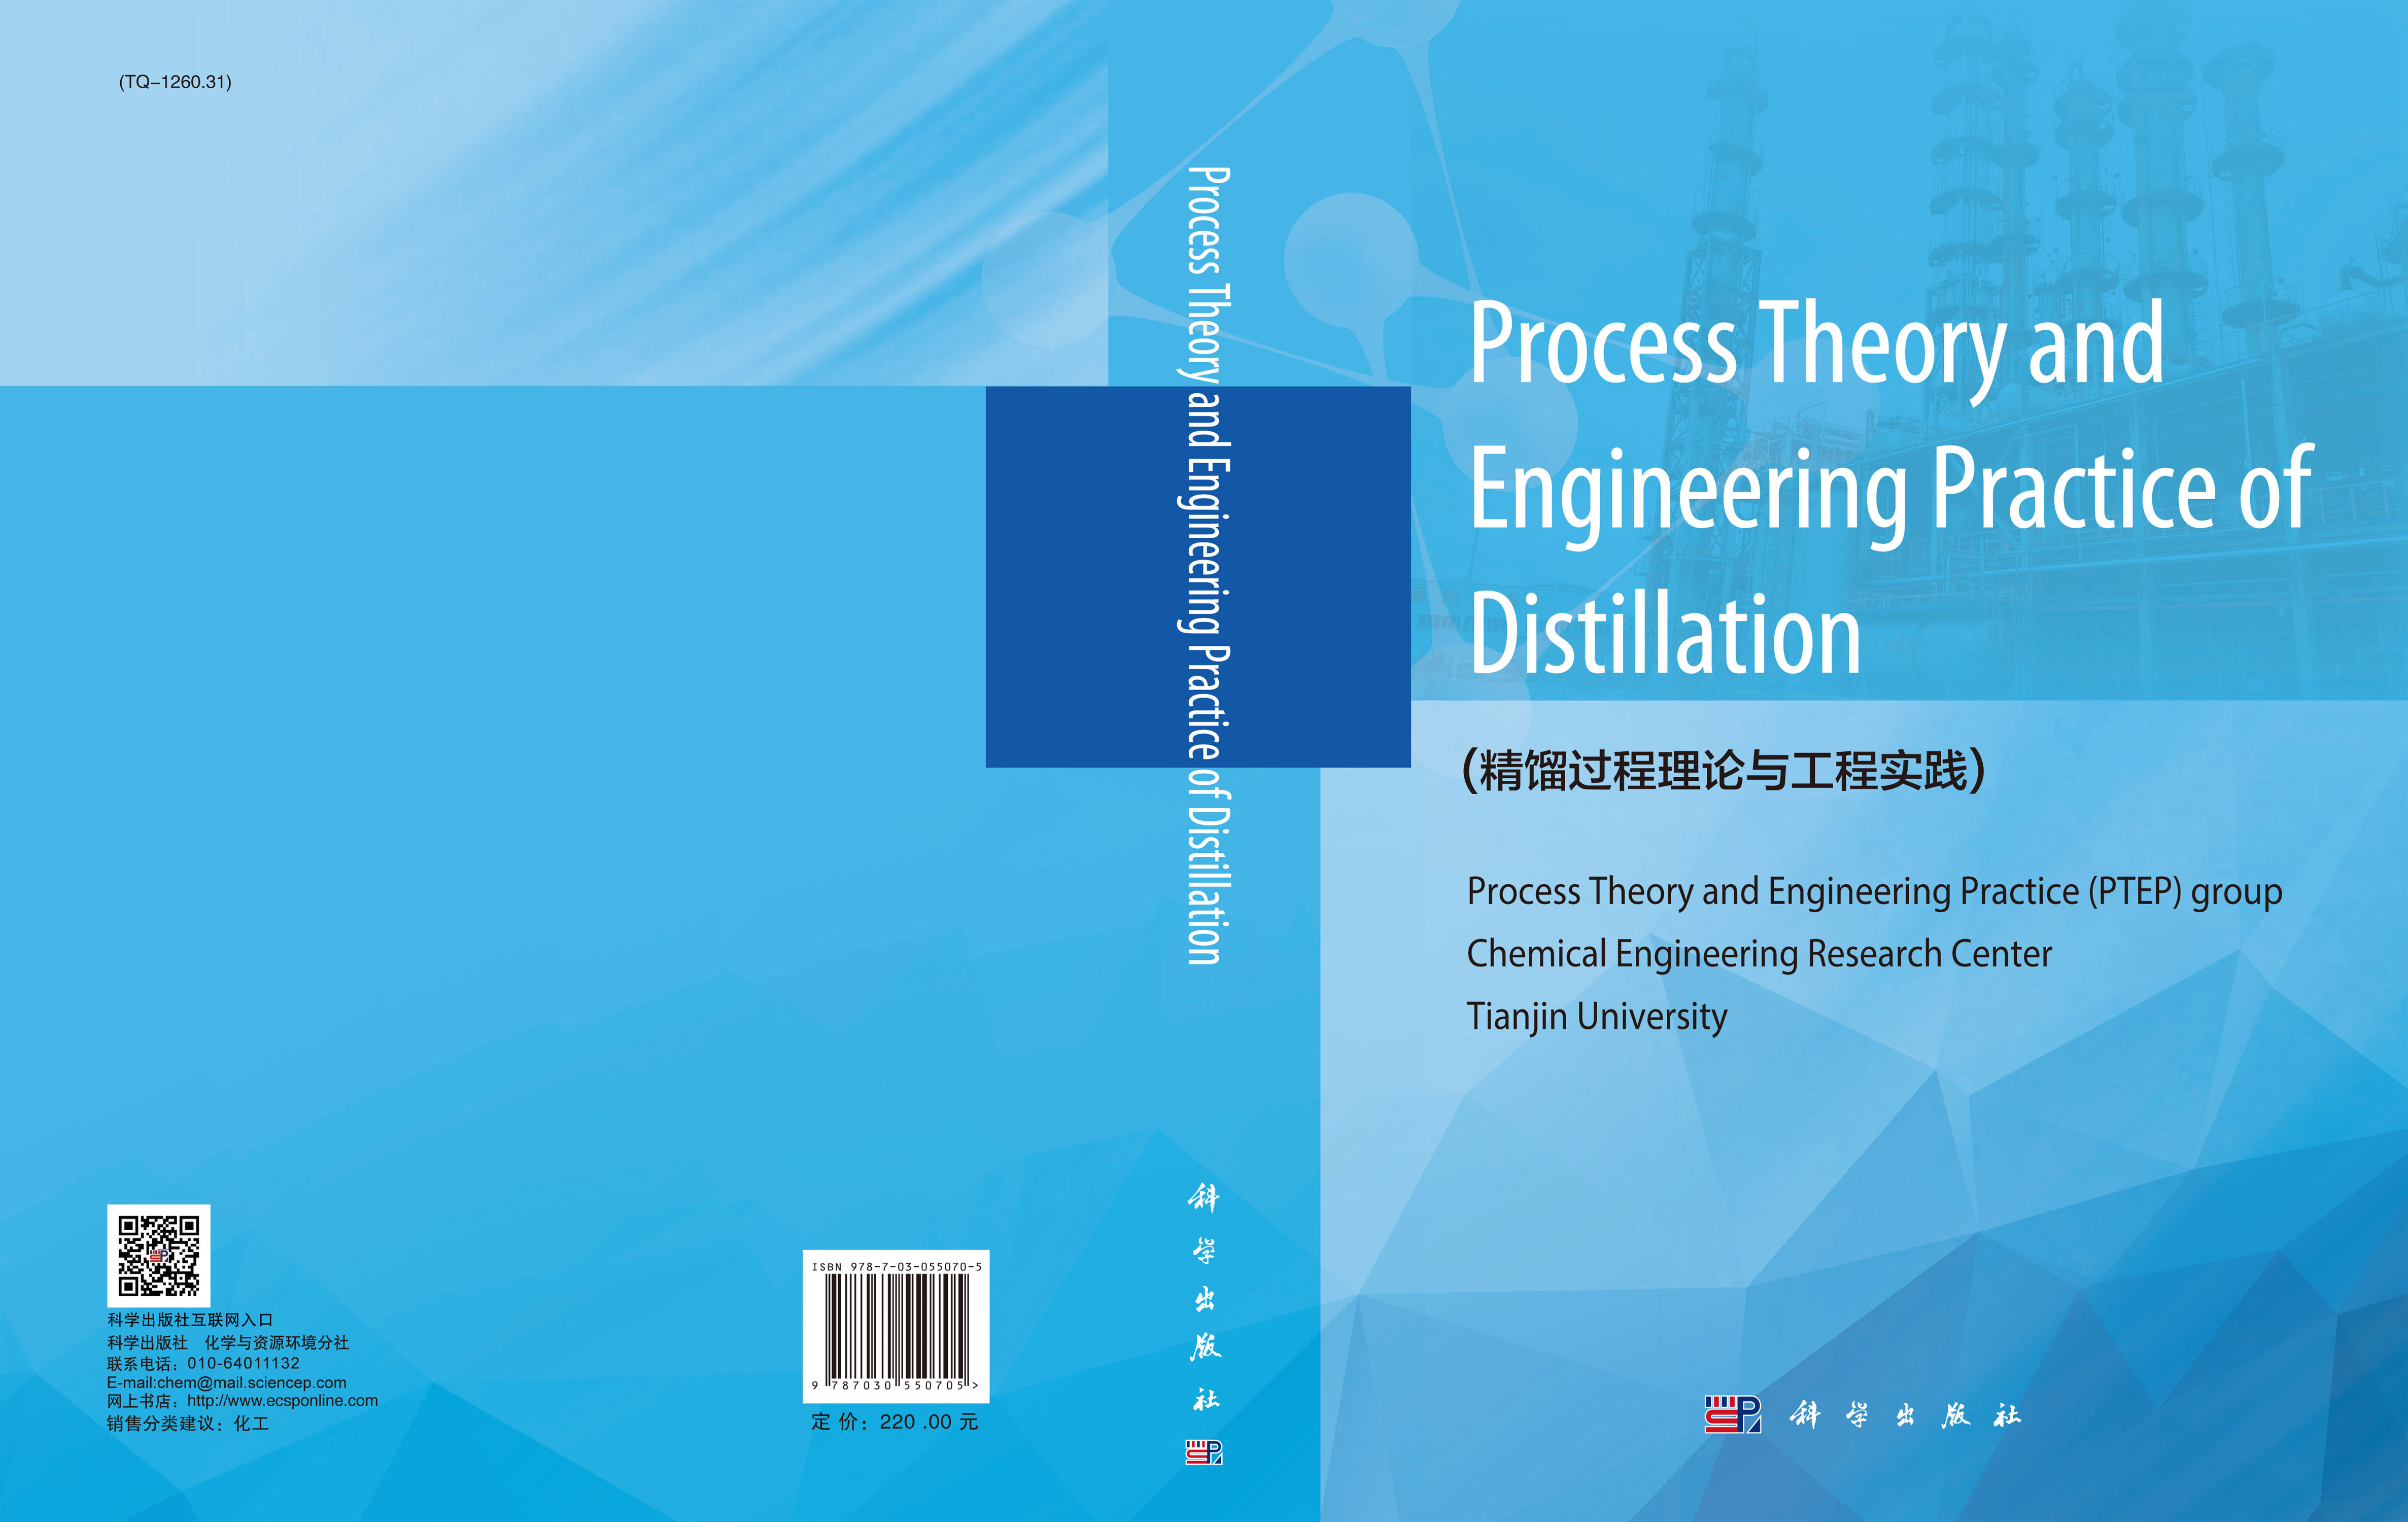 Process Theory and Engineering Practice of Distillation